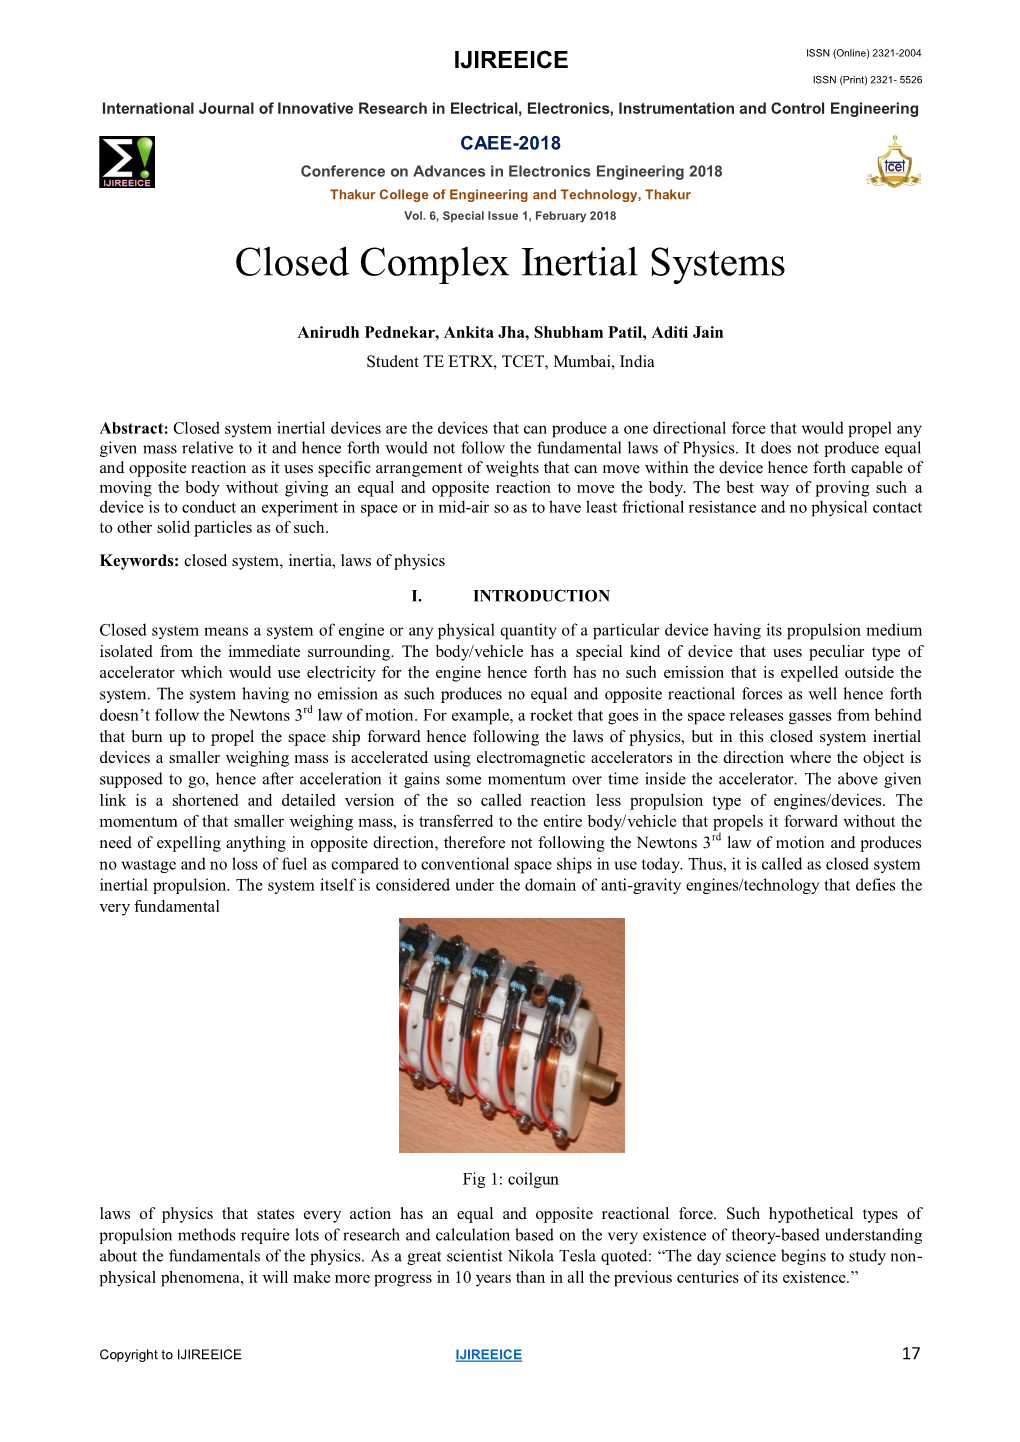 Closed Complex Inertial Systems